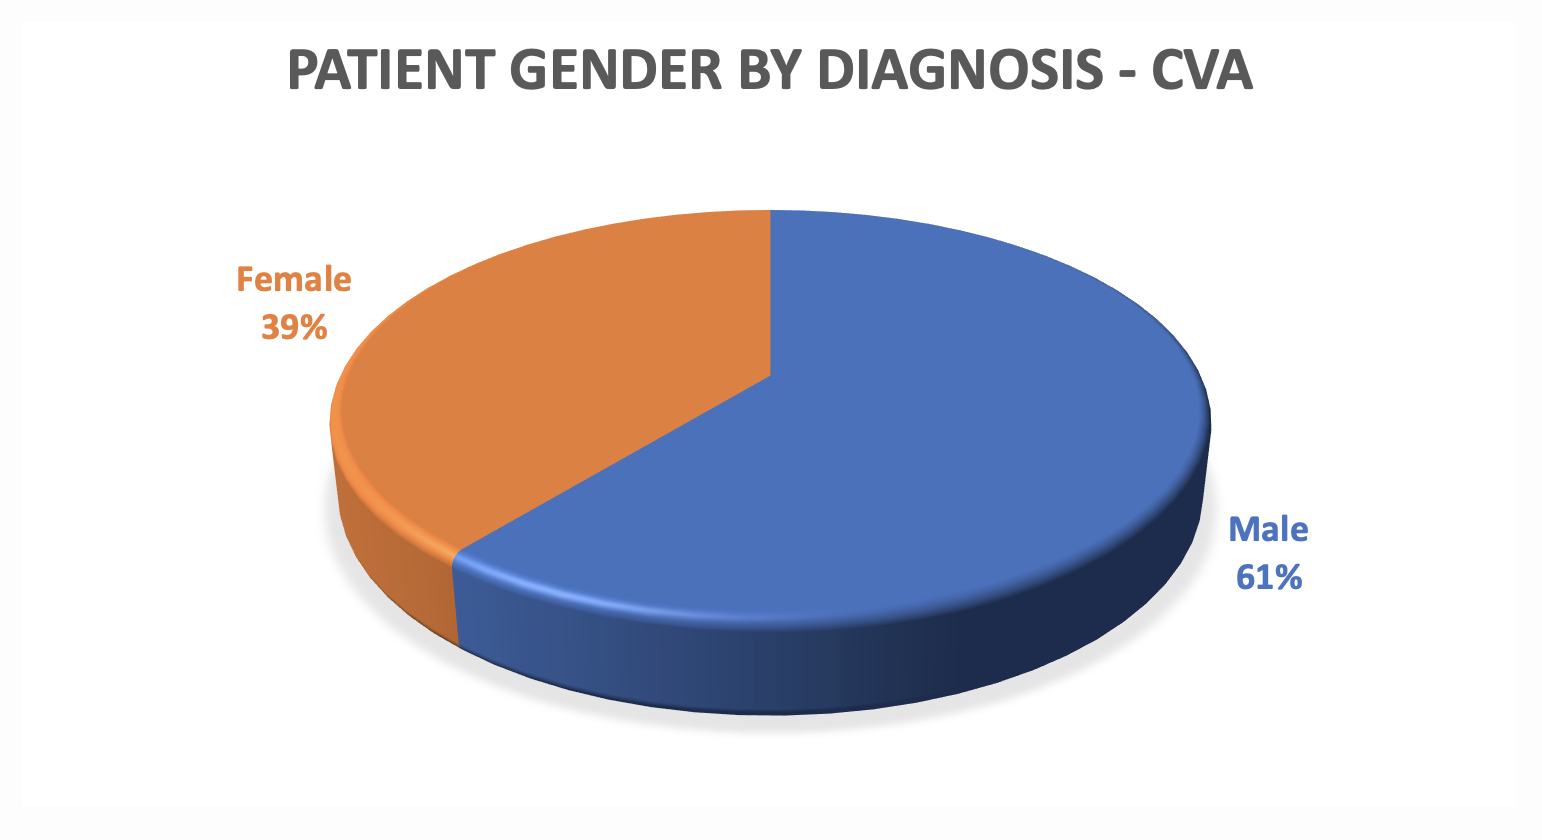 image of pie chart reveals patient gender data for CVA at Pate Rehab